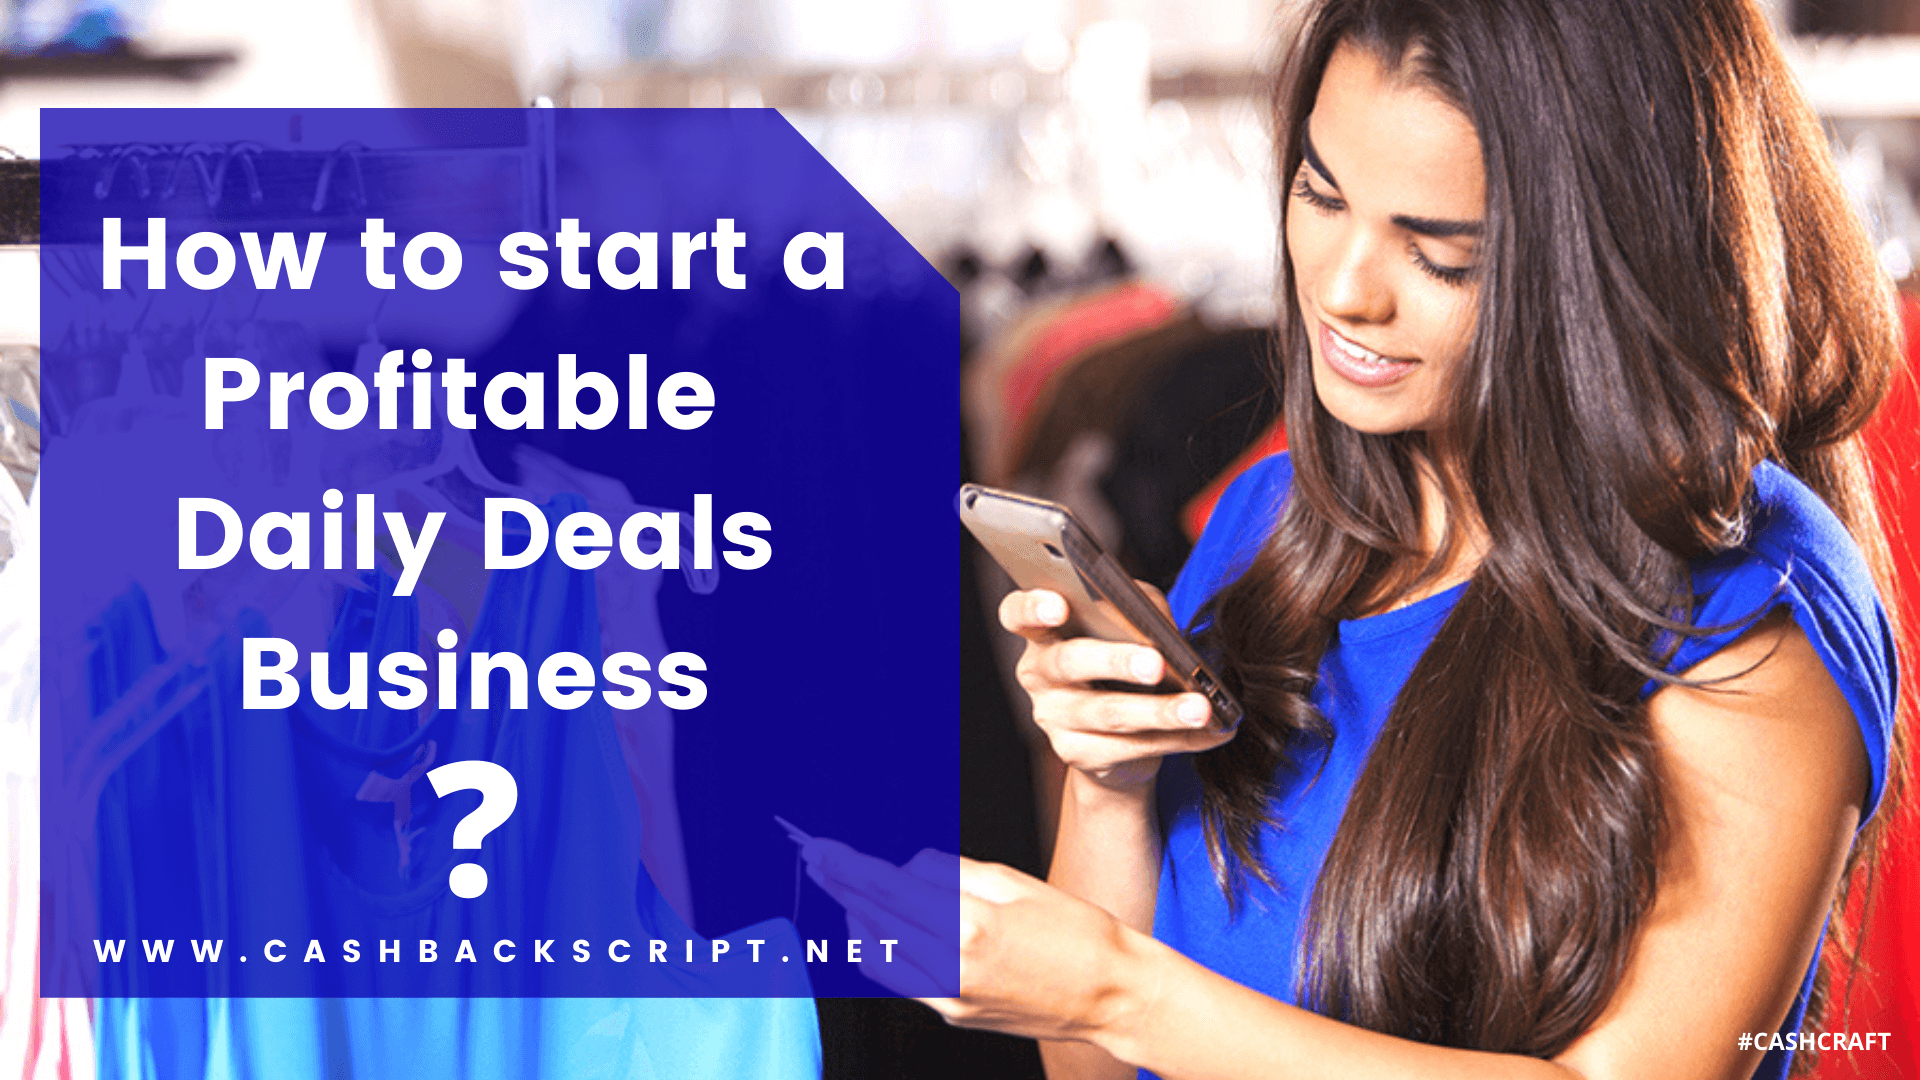 How to Start a Profitable Daily Deals Business?